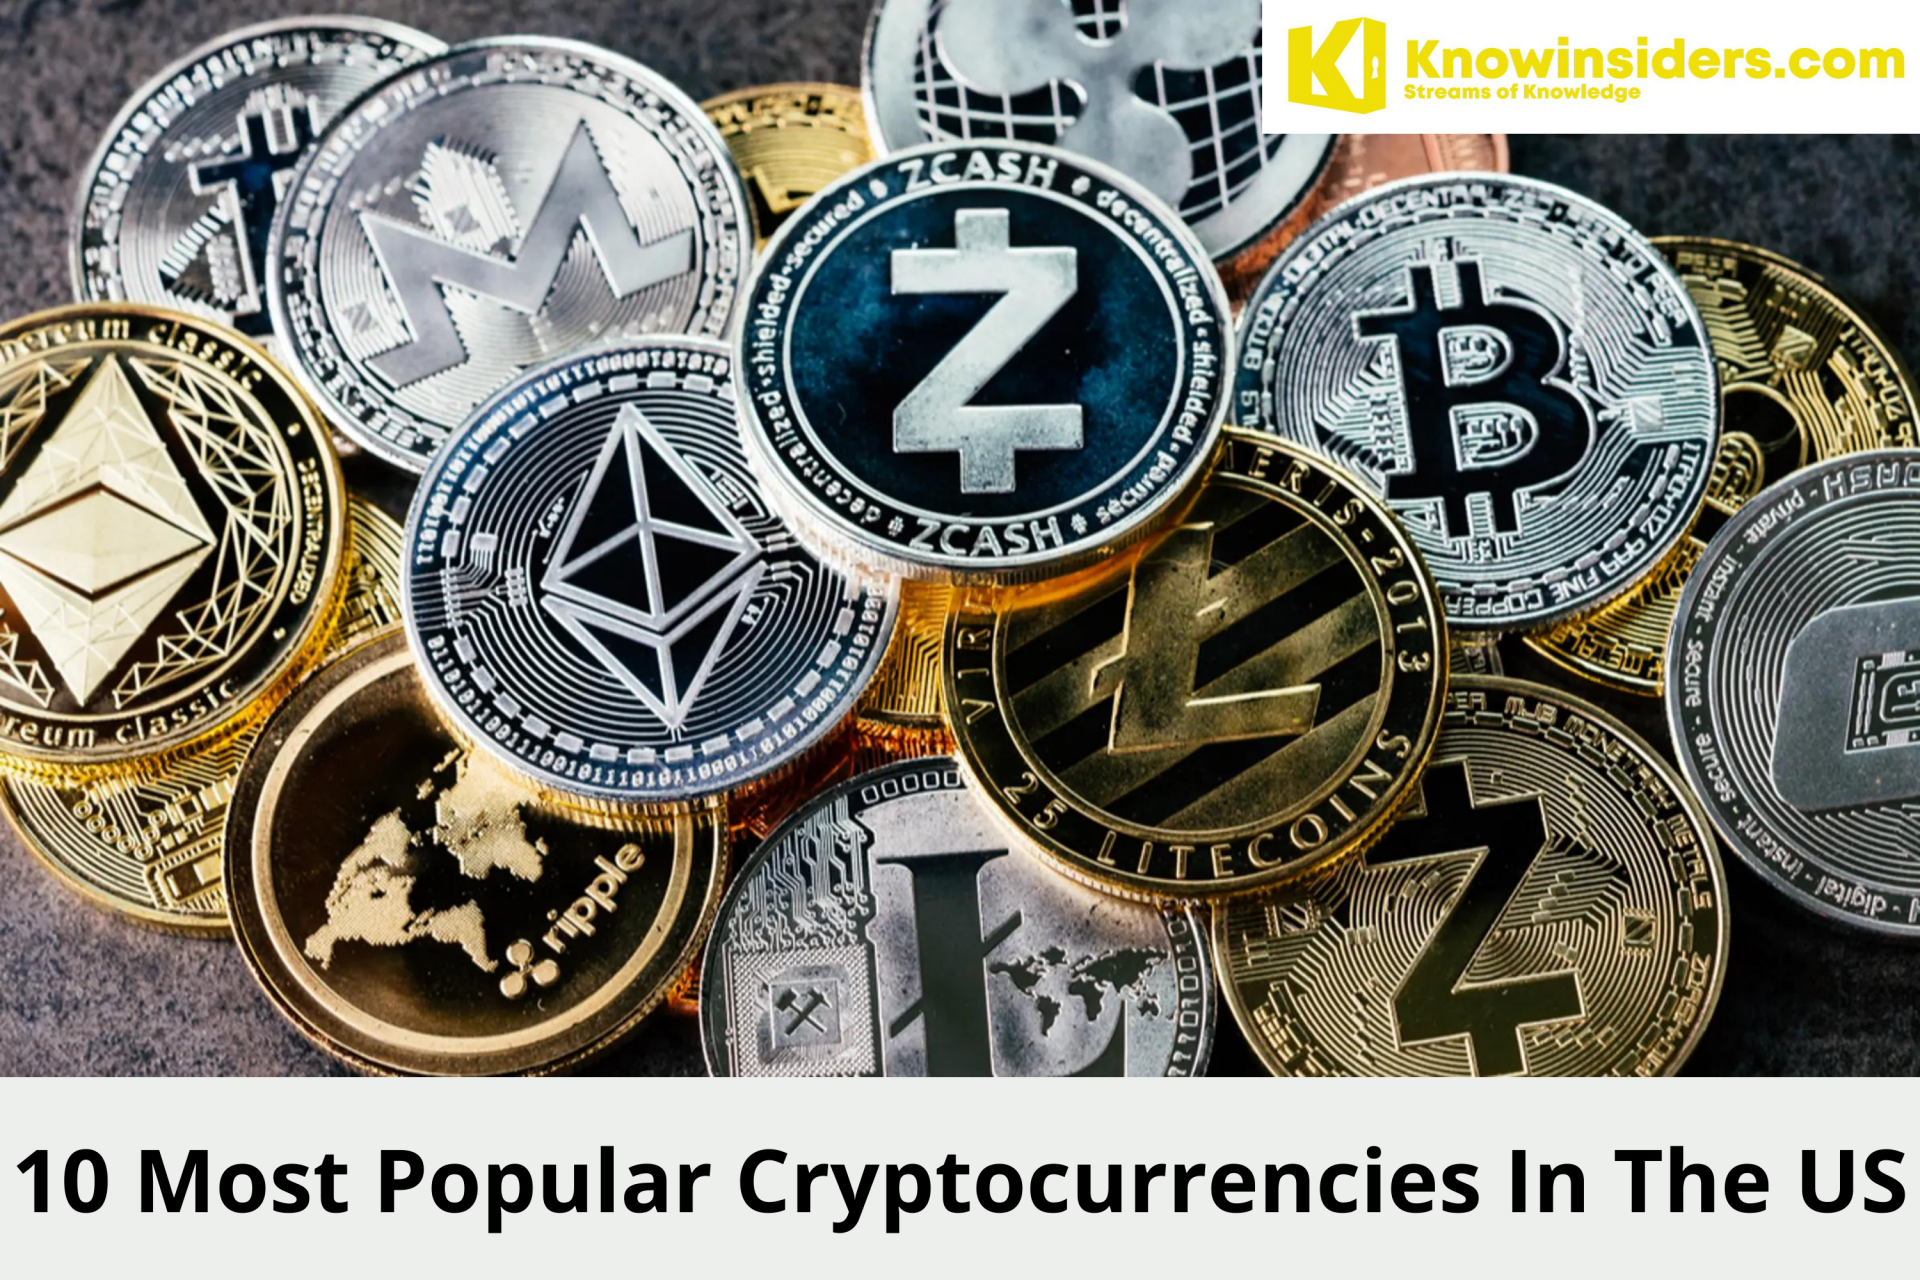 What Are the Most Popular Cryptocurrencies In The US